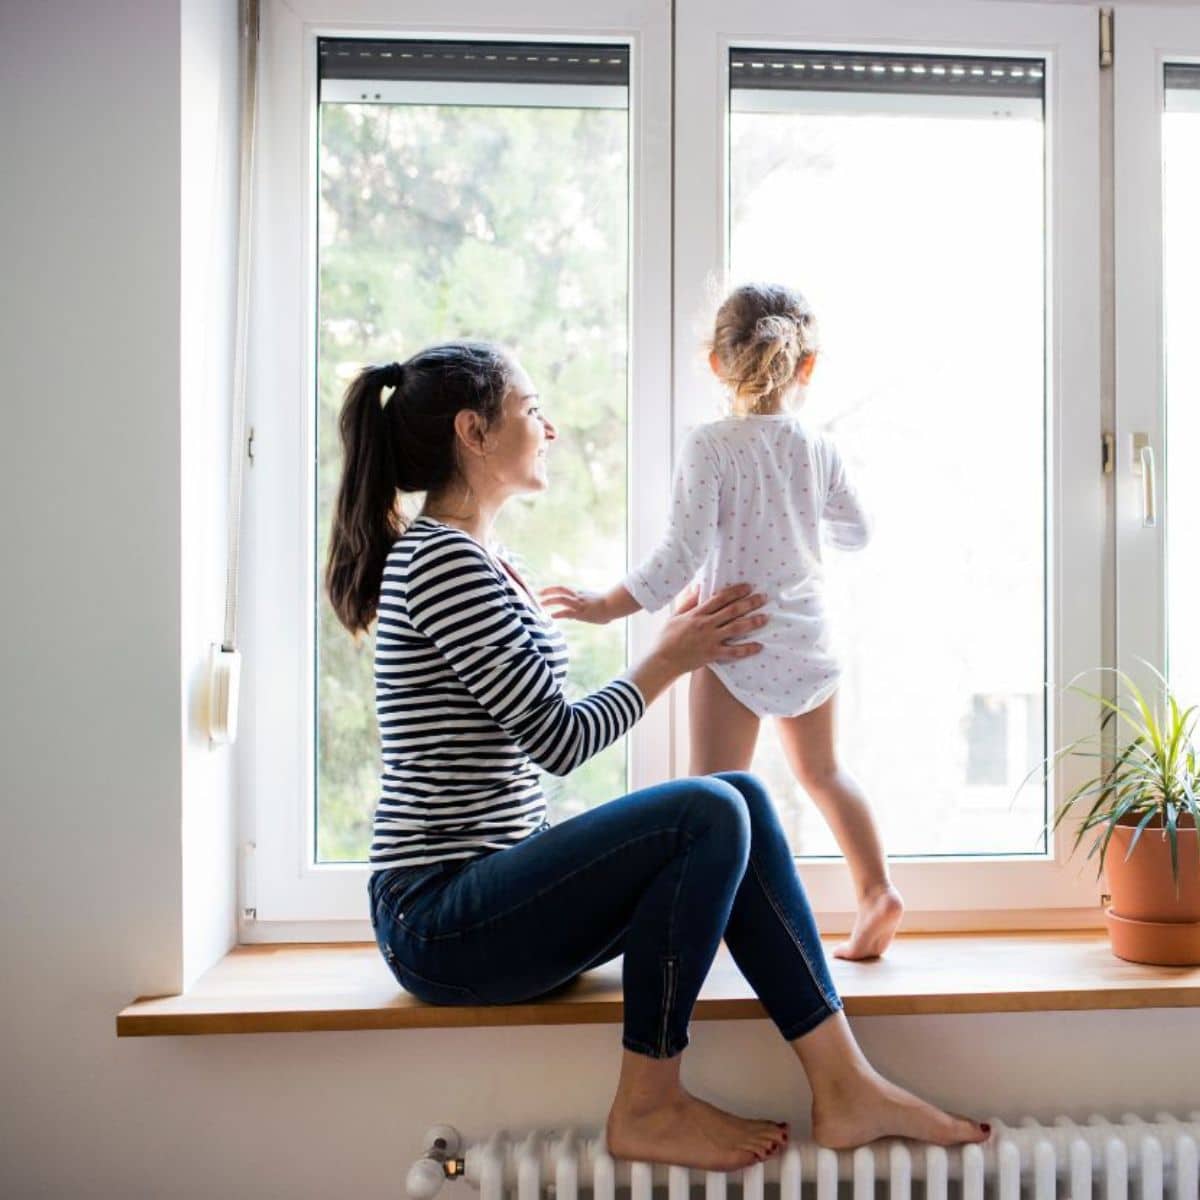 Young woman playing with her daughter near a window.